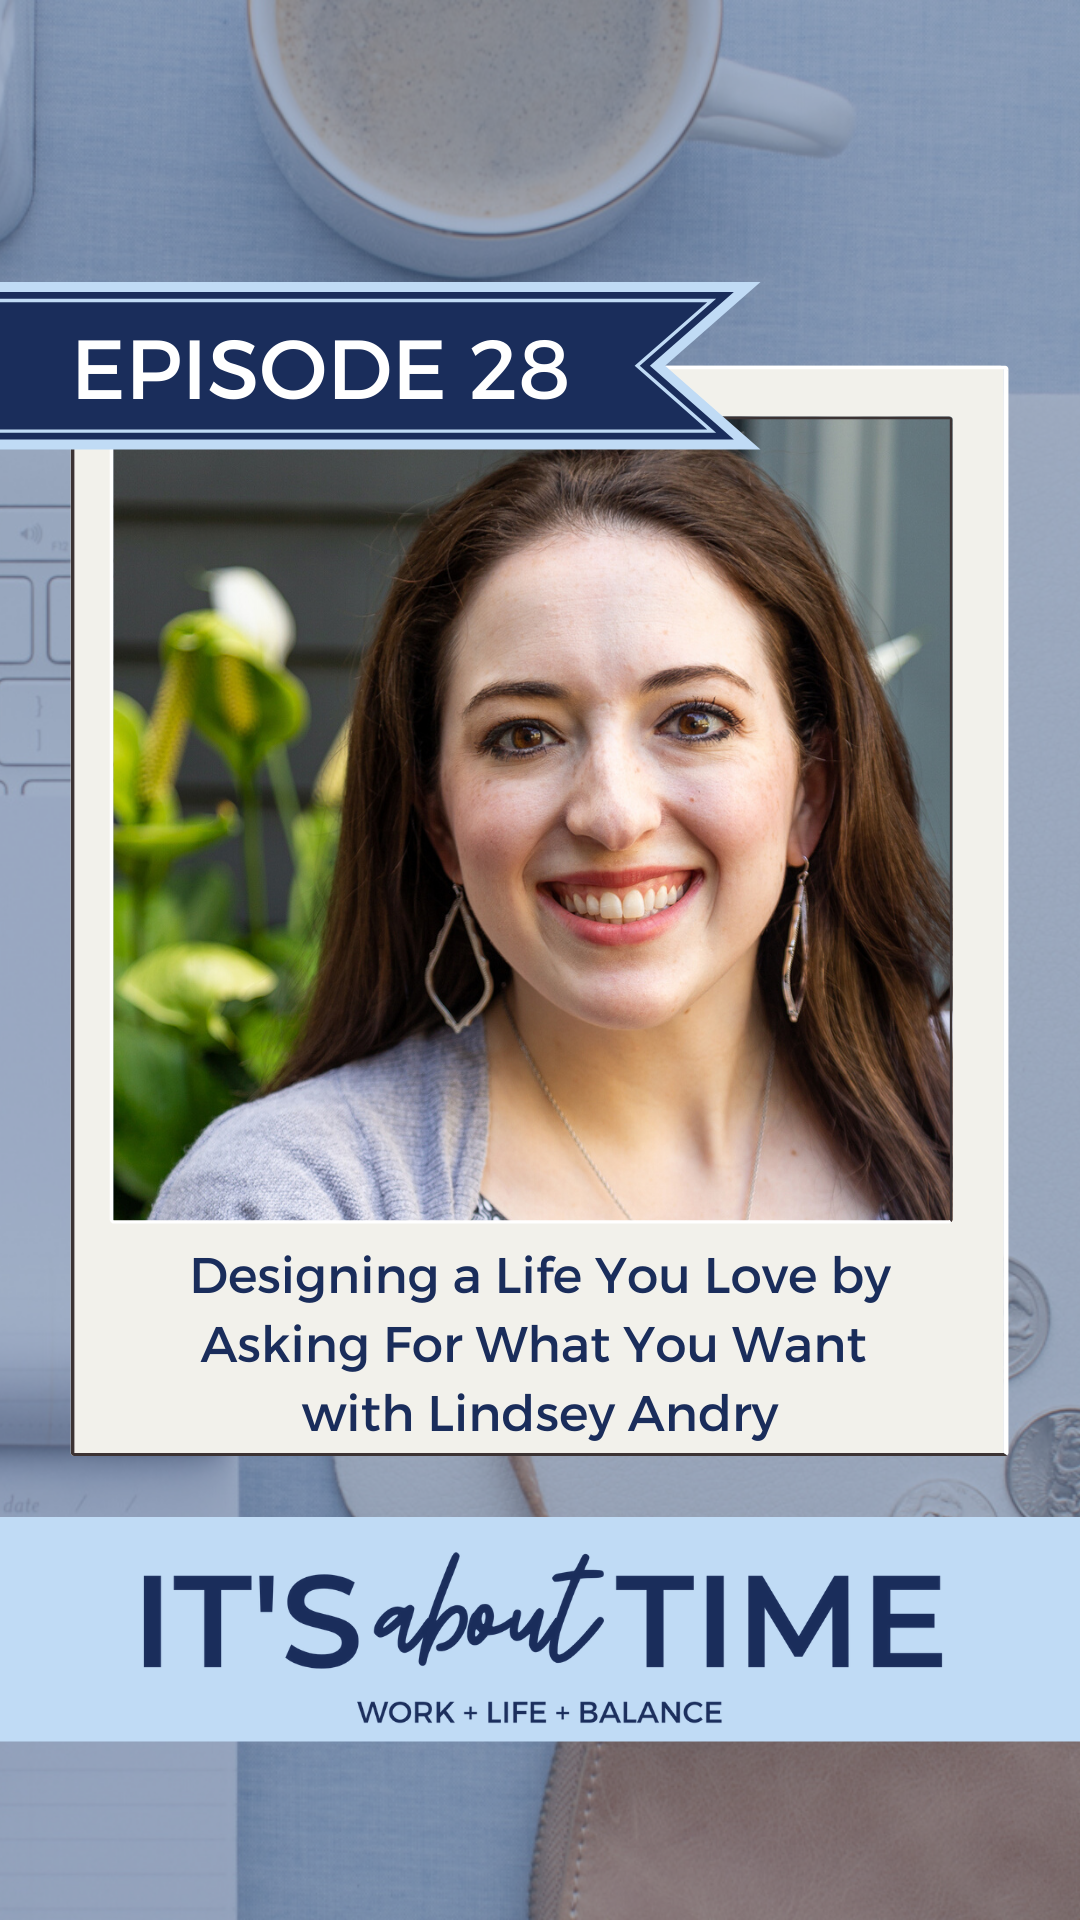 lindsey-andry-its-about-time-podcast-interview.png